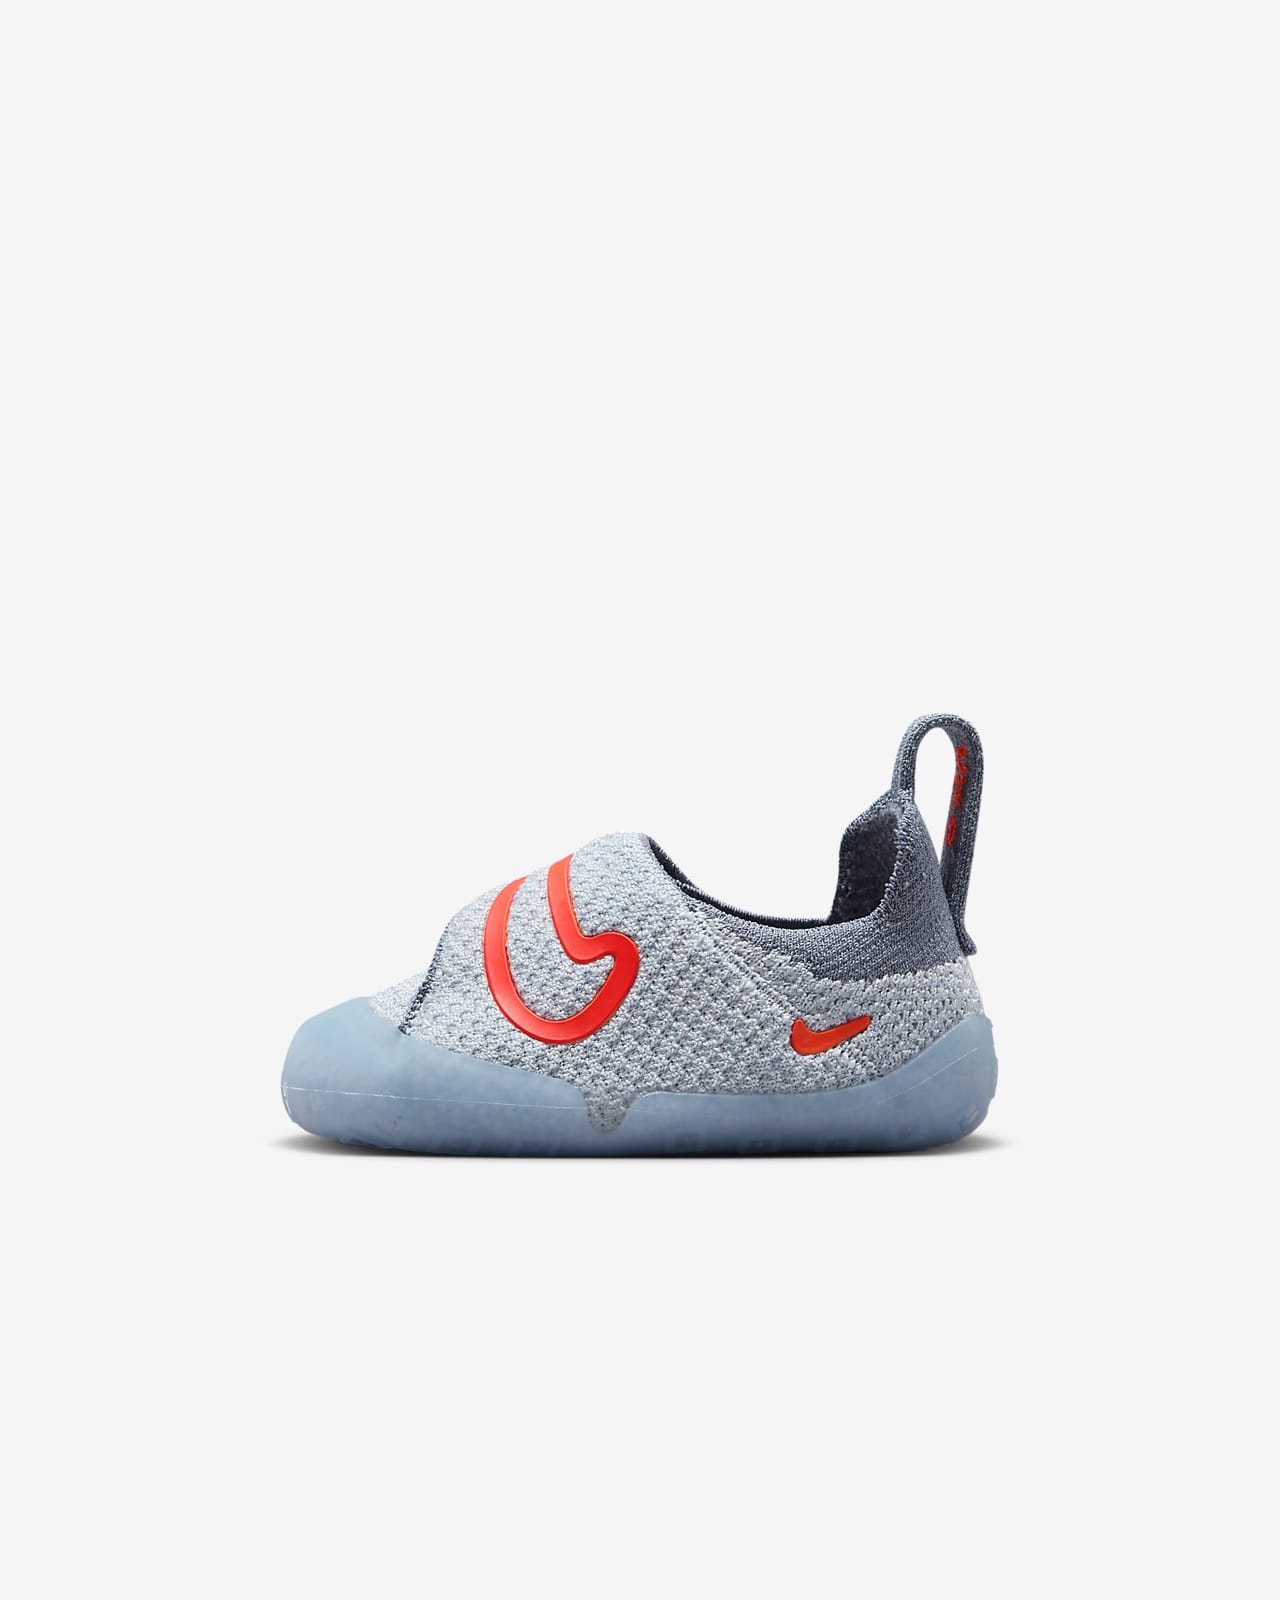 https://static.nike.com/a/images/t_PDP_1280_v1/f_auto,q_auto:eco/9b7ab32f-d64b-46c0-91b2-a17d5cce324d/swoosh-1-shoes-tVCmPm.png